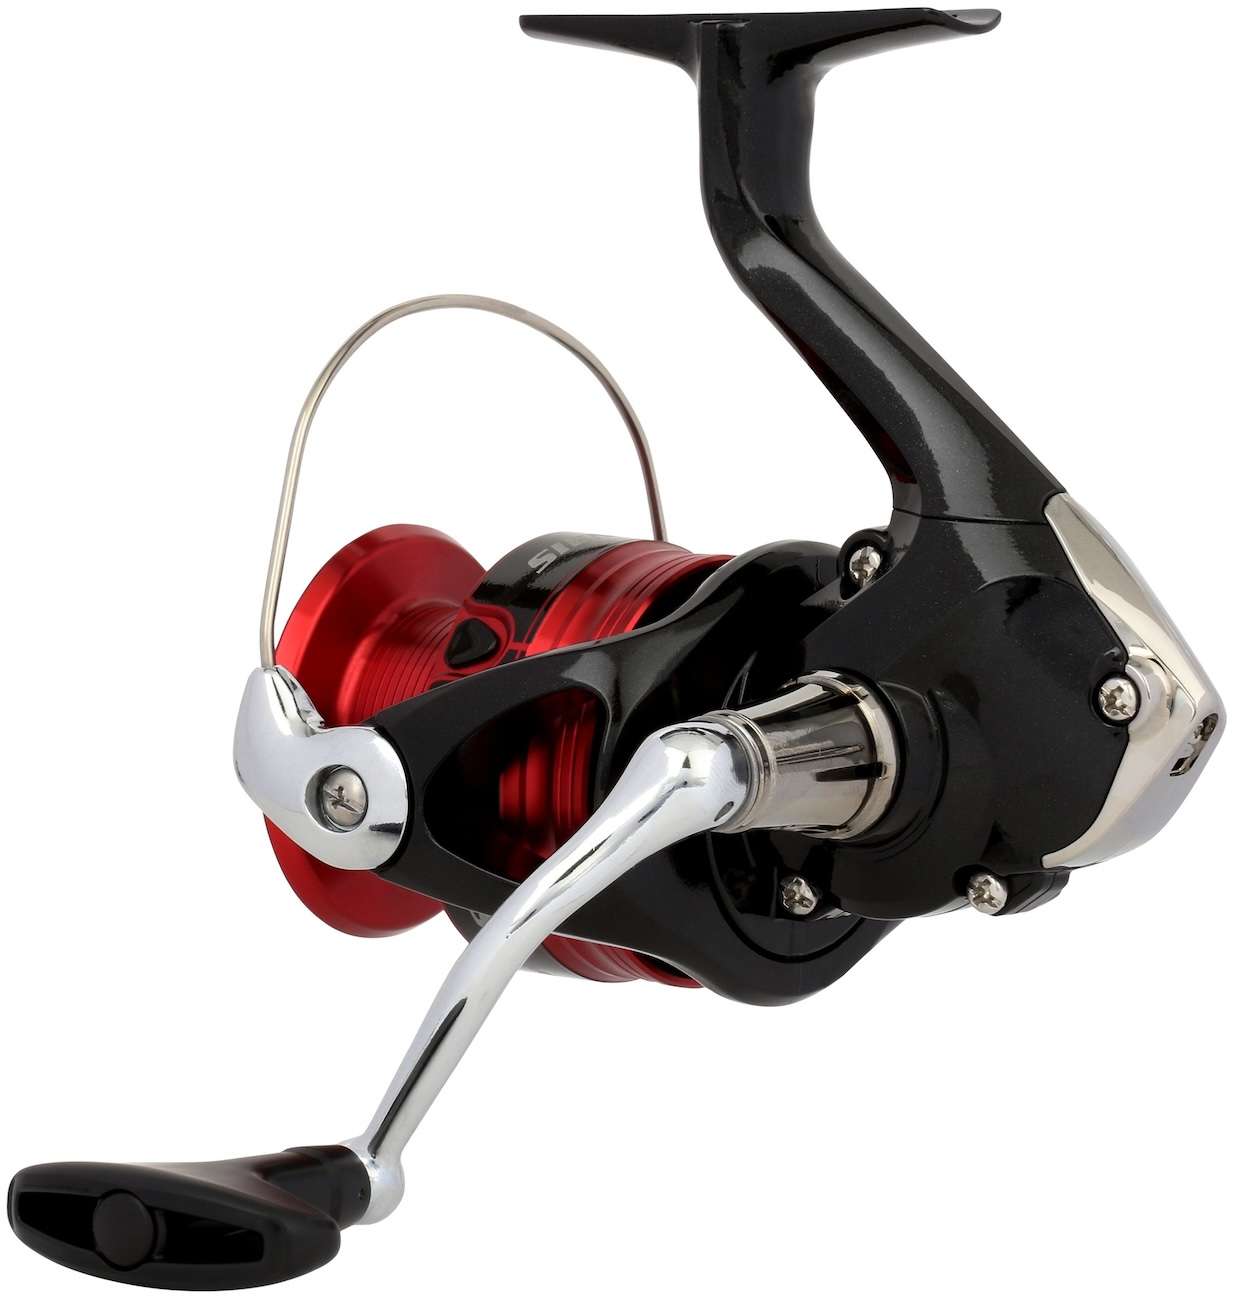 Buy SHIMANO Spinning Reel 19 Sienna 4000 No. 4 with 150m thread